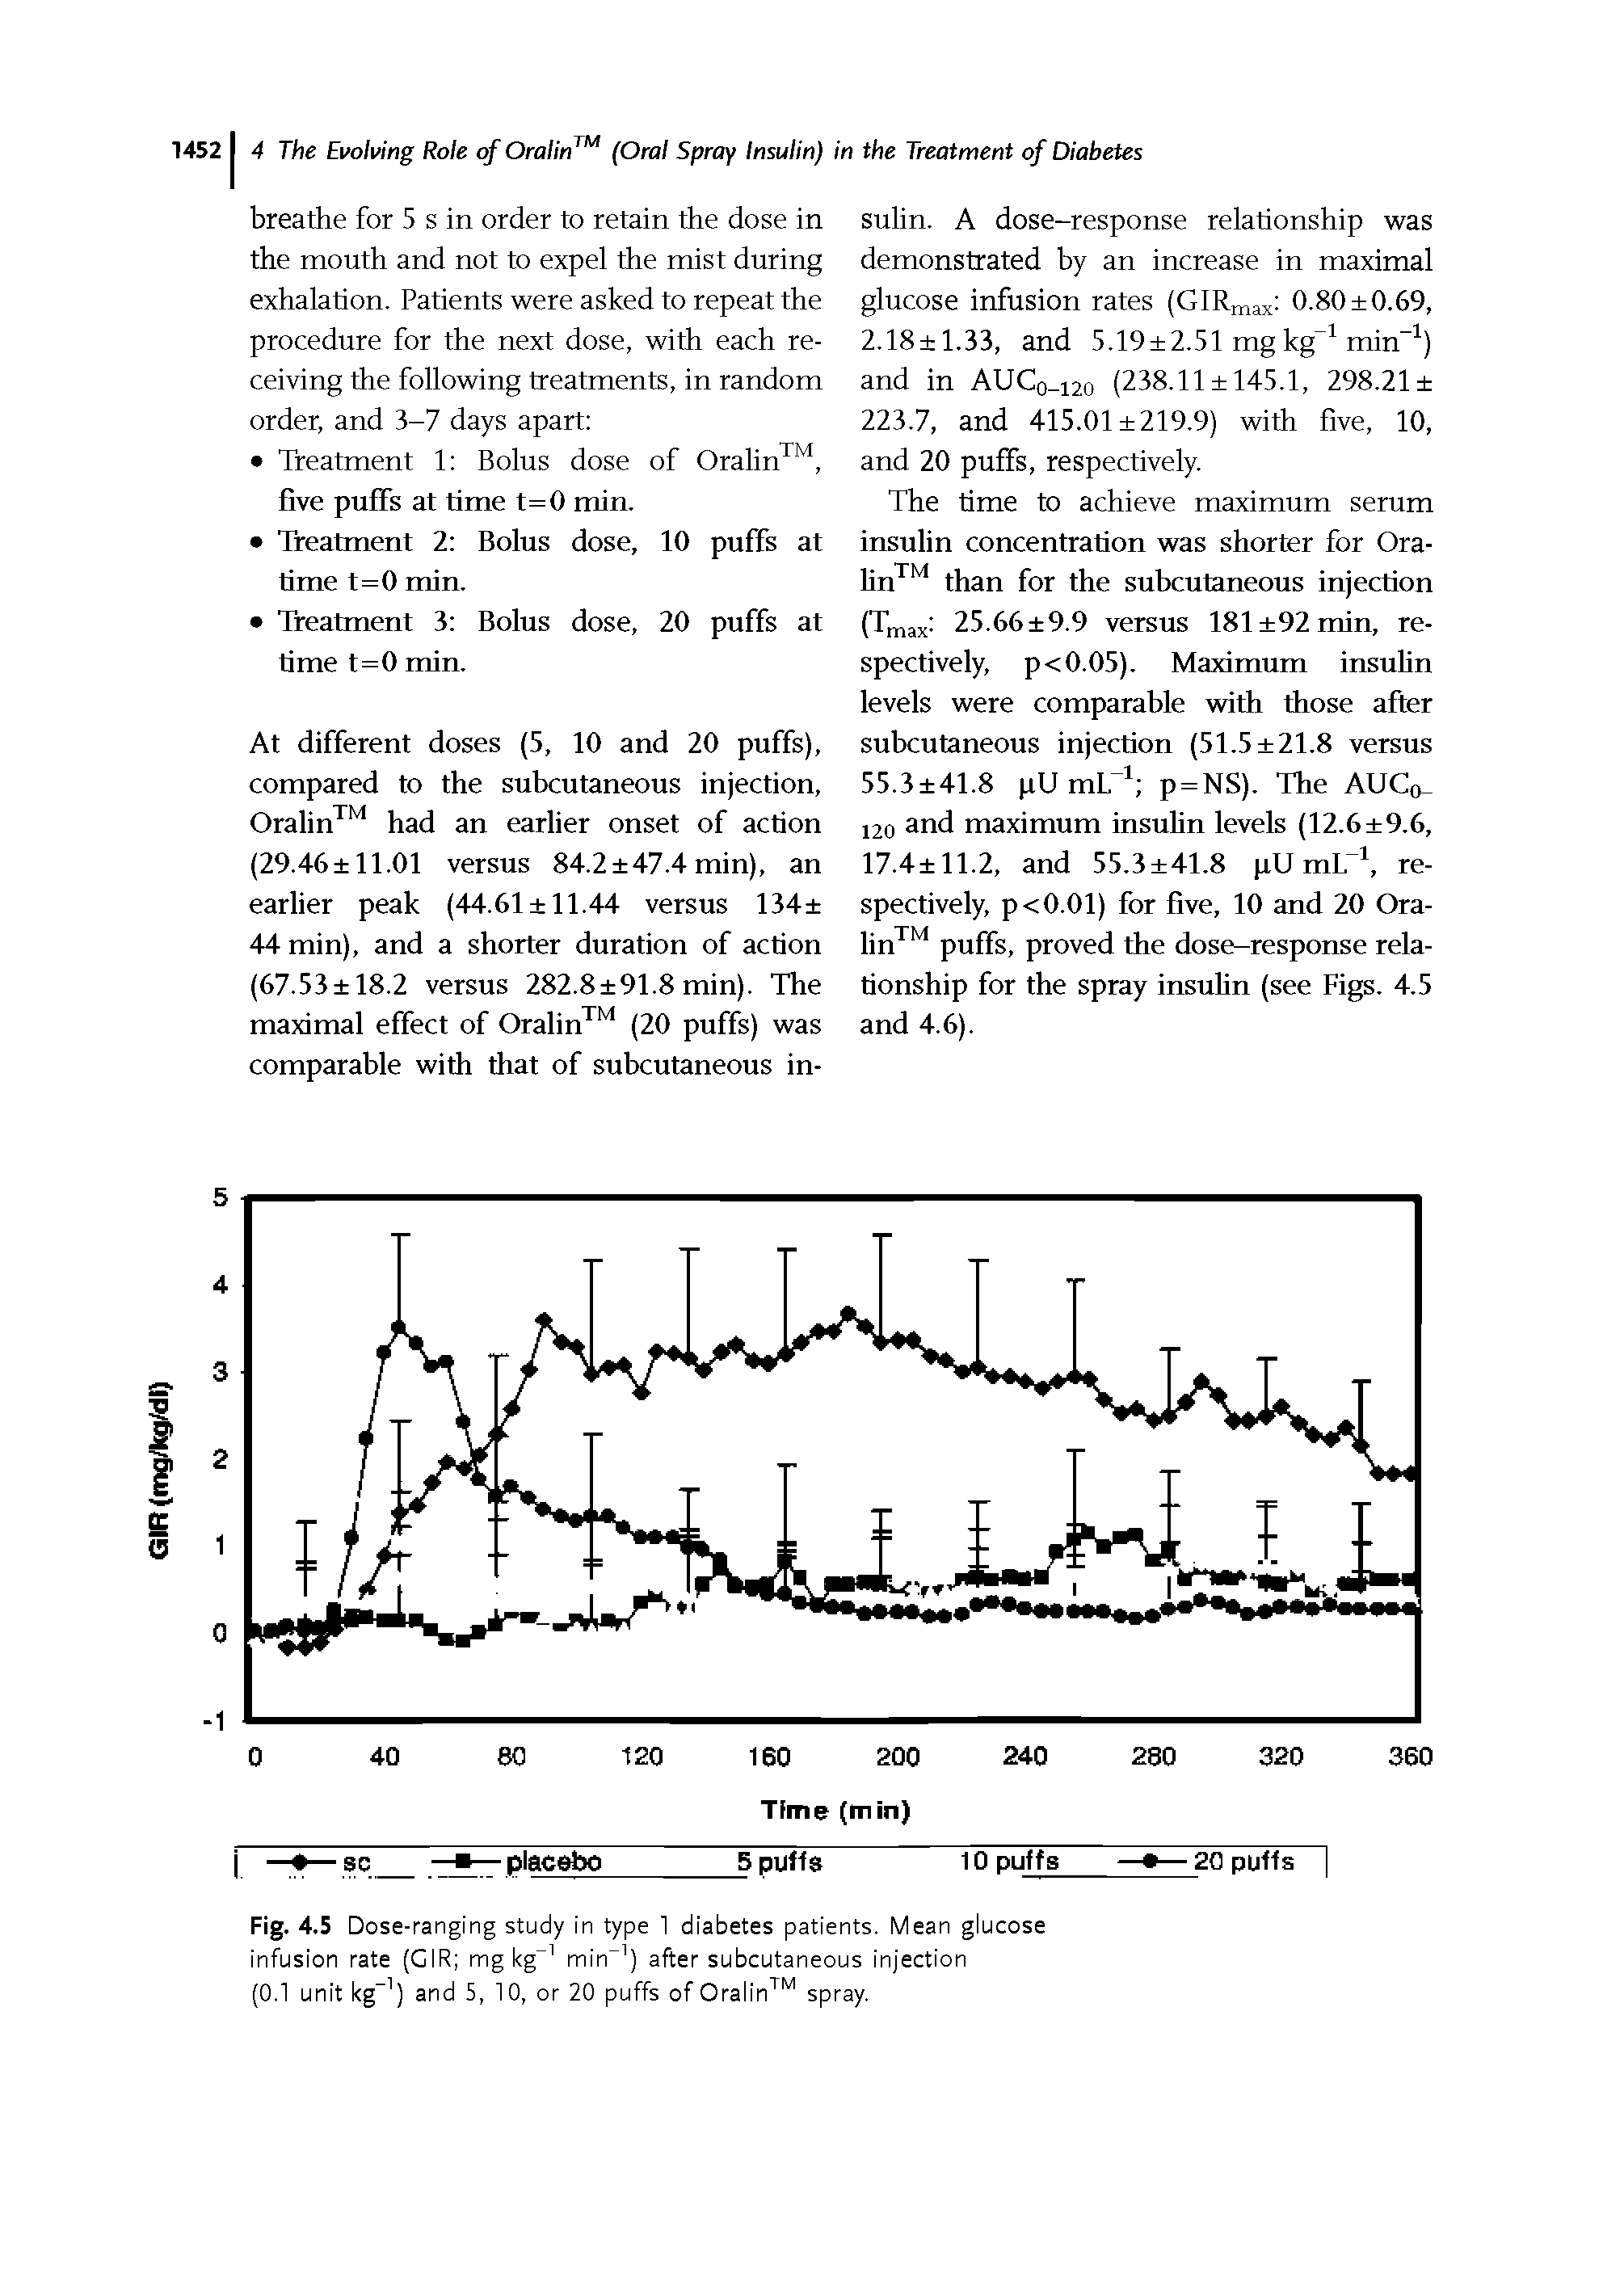 Fig. 4.5 Dose-ranging study in type 1 diabetes patients. Mean glucose infusion rate (GIR mg kg min ) after subcutaneous injection (0.1 unit kg ) and 5, 10, or 20 puffs of Oralin " spray.